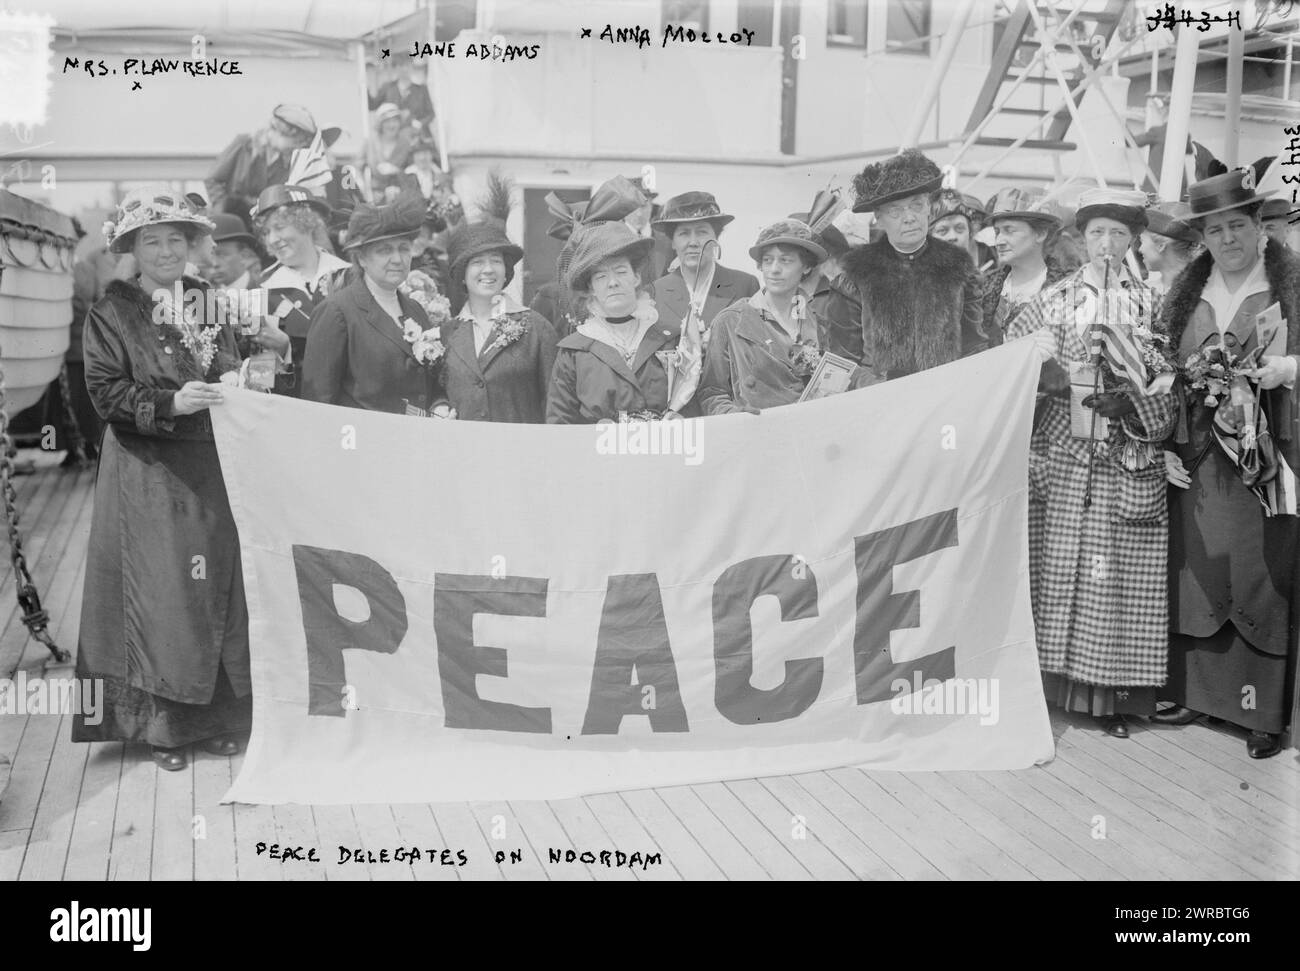 Peace Delegates on NOORDAM, Mrs. P. Lawrence, Jane Addams, Anna Molloy, Photograph shows the American delegates to the International Congress of Women which was held at the Hague, the Netherlands in 1915. The delegates include: feminist and peace activist Emmeline Pethick-Lawrence (1867-1954), social activist and writer Jane Addams (1860-1935), and Annie E. Malloy, president of the Boston Telephone Operators Union. To the right of Malloy may be labor journalist and activist Mary Heaton Vorst (1874-1966) and the woman wearing a hat on the far right may be Lillian Kohlhamer of Chicago. Stock Photo